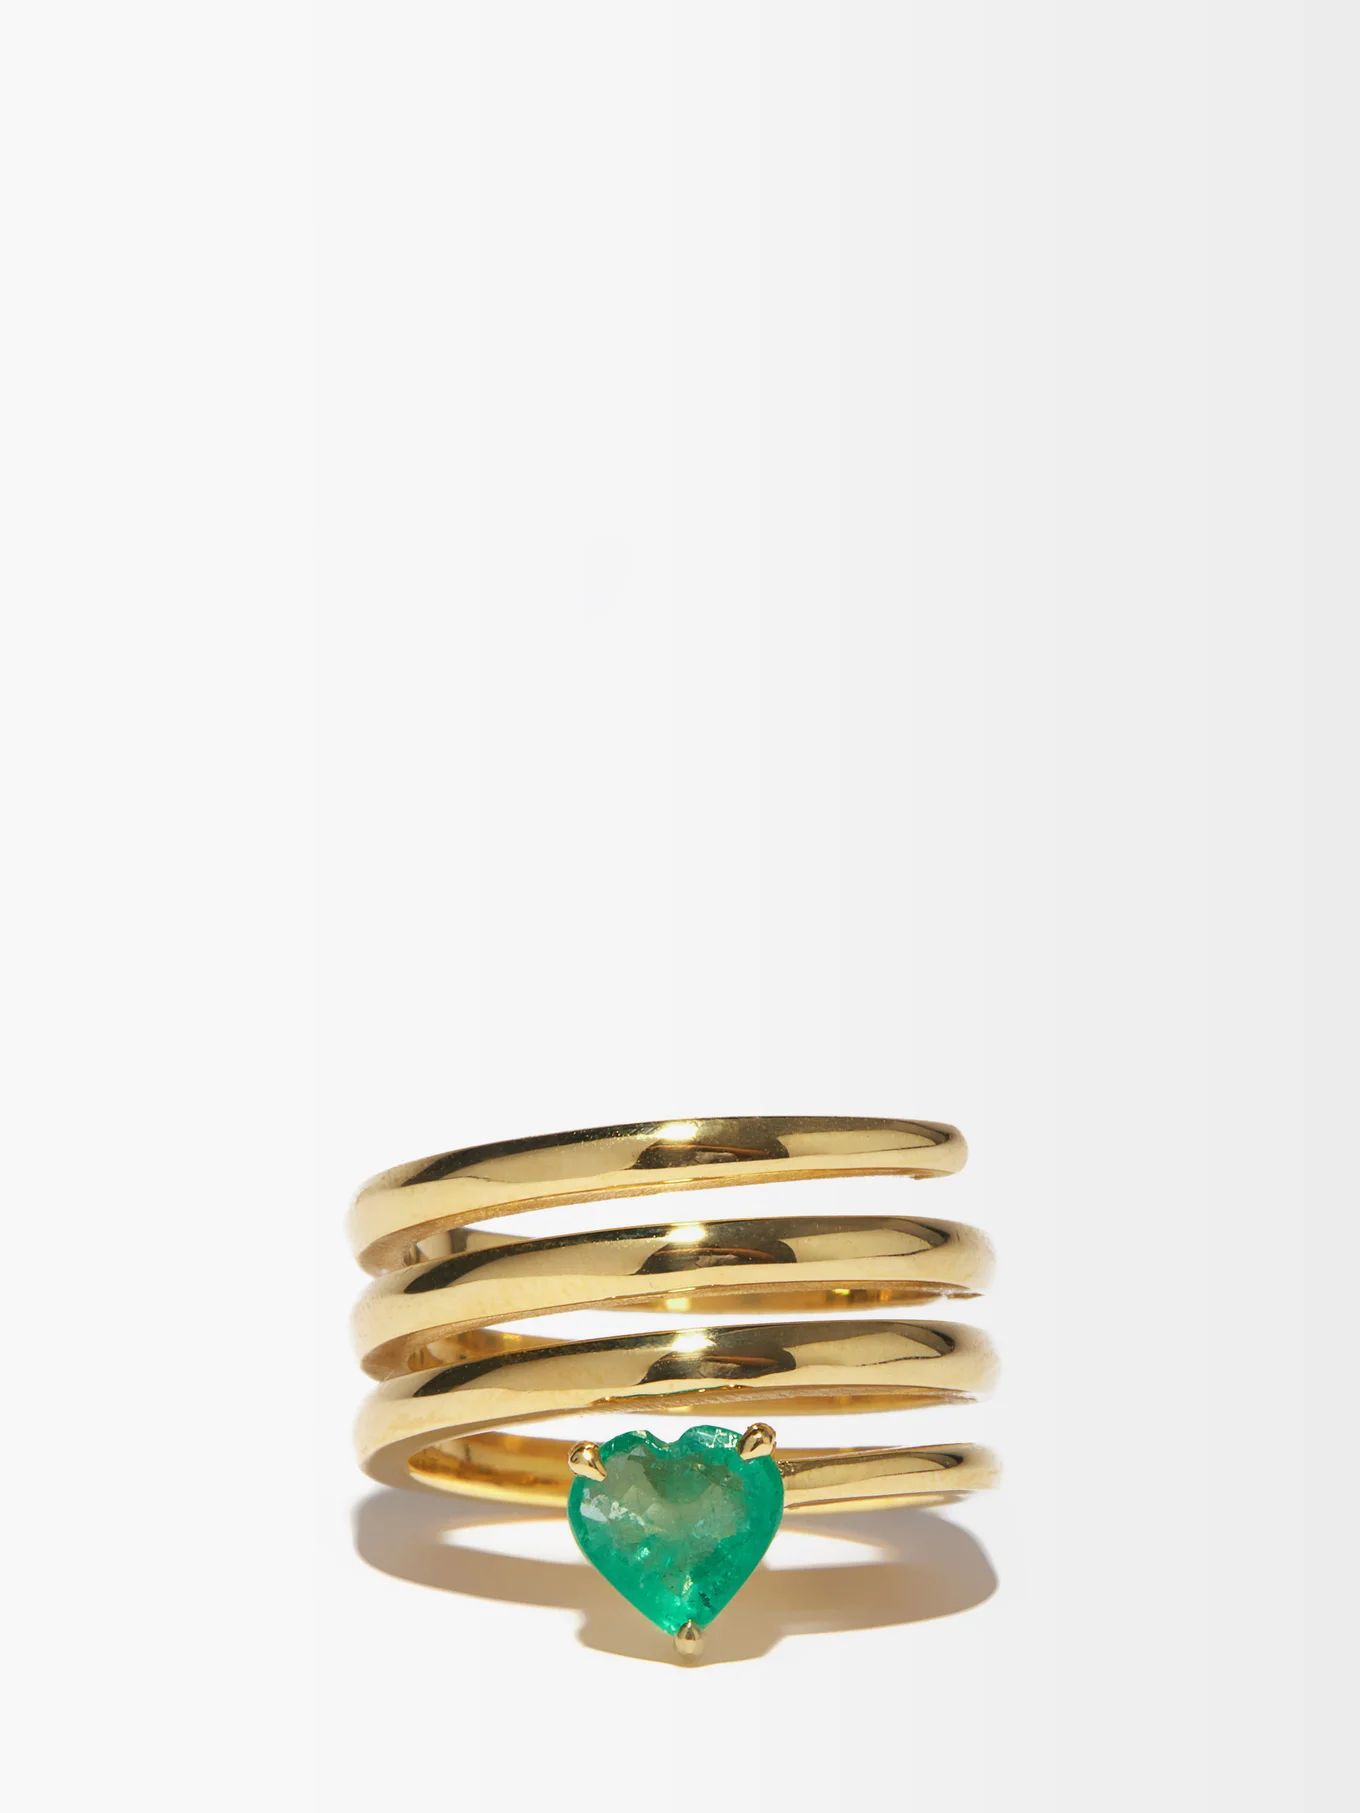 Heart emerald & 18kt gold spiral ring | Shay | Matches (UK)